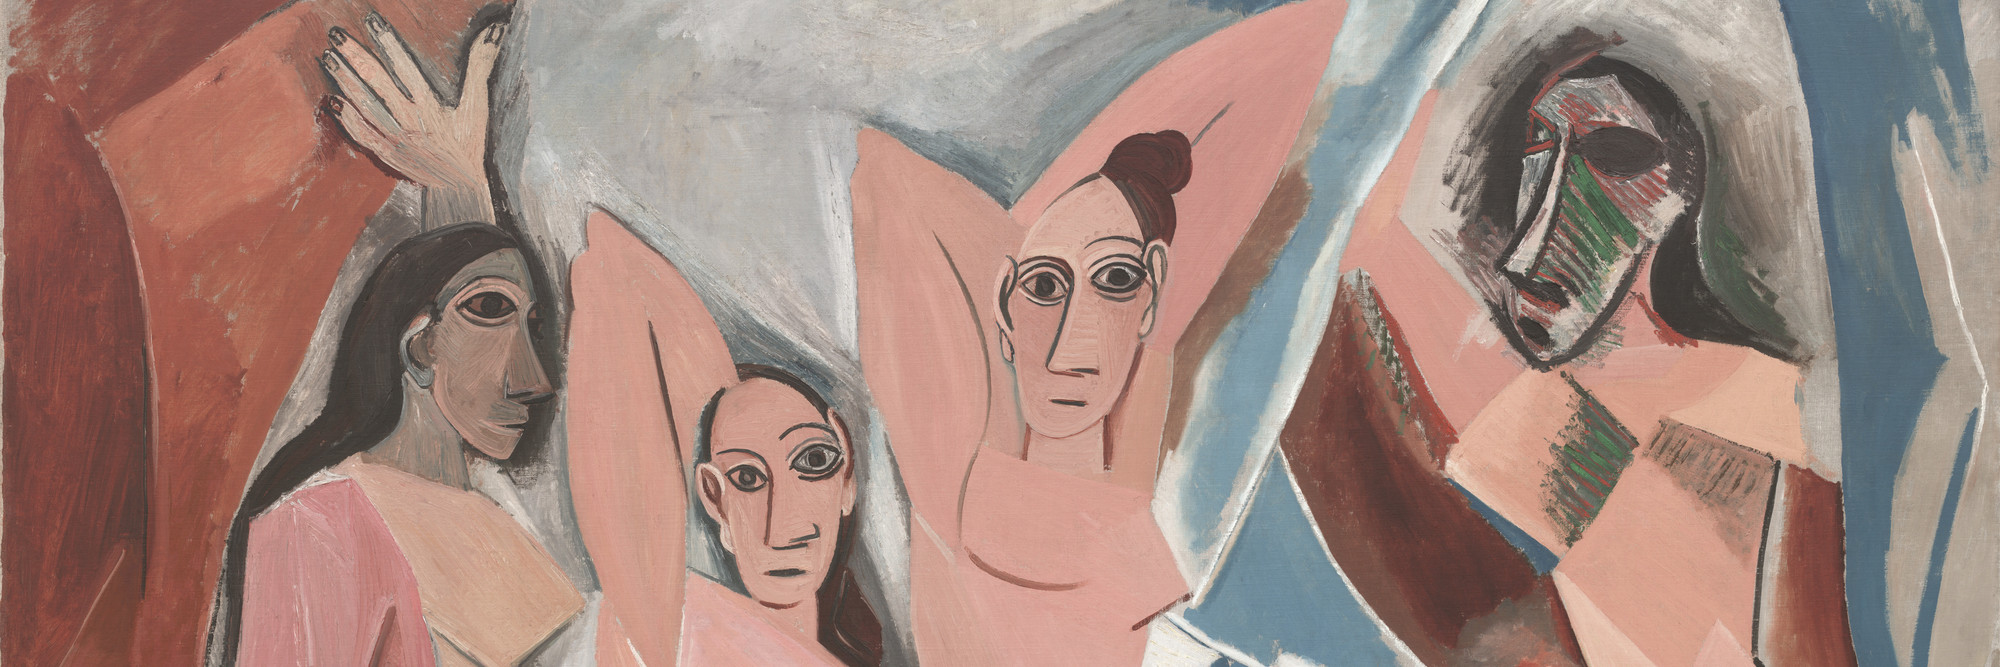 Pablo Picasso. *Les Demoiselles d’Avignon. Paris, June–July 1907. Oil on canvas, 8ʹ × 7ʹ 8ʺ (243.9 × 233.7 cm). Acquired through the Lillie P. Bliss Bequest. © 2016 Estate of Pablo Picasso / Artists Rights Society (ARS), New York